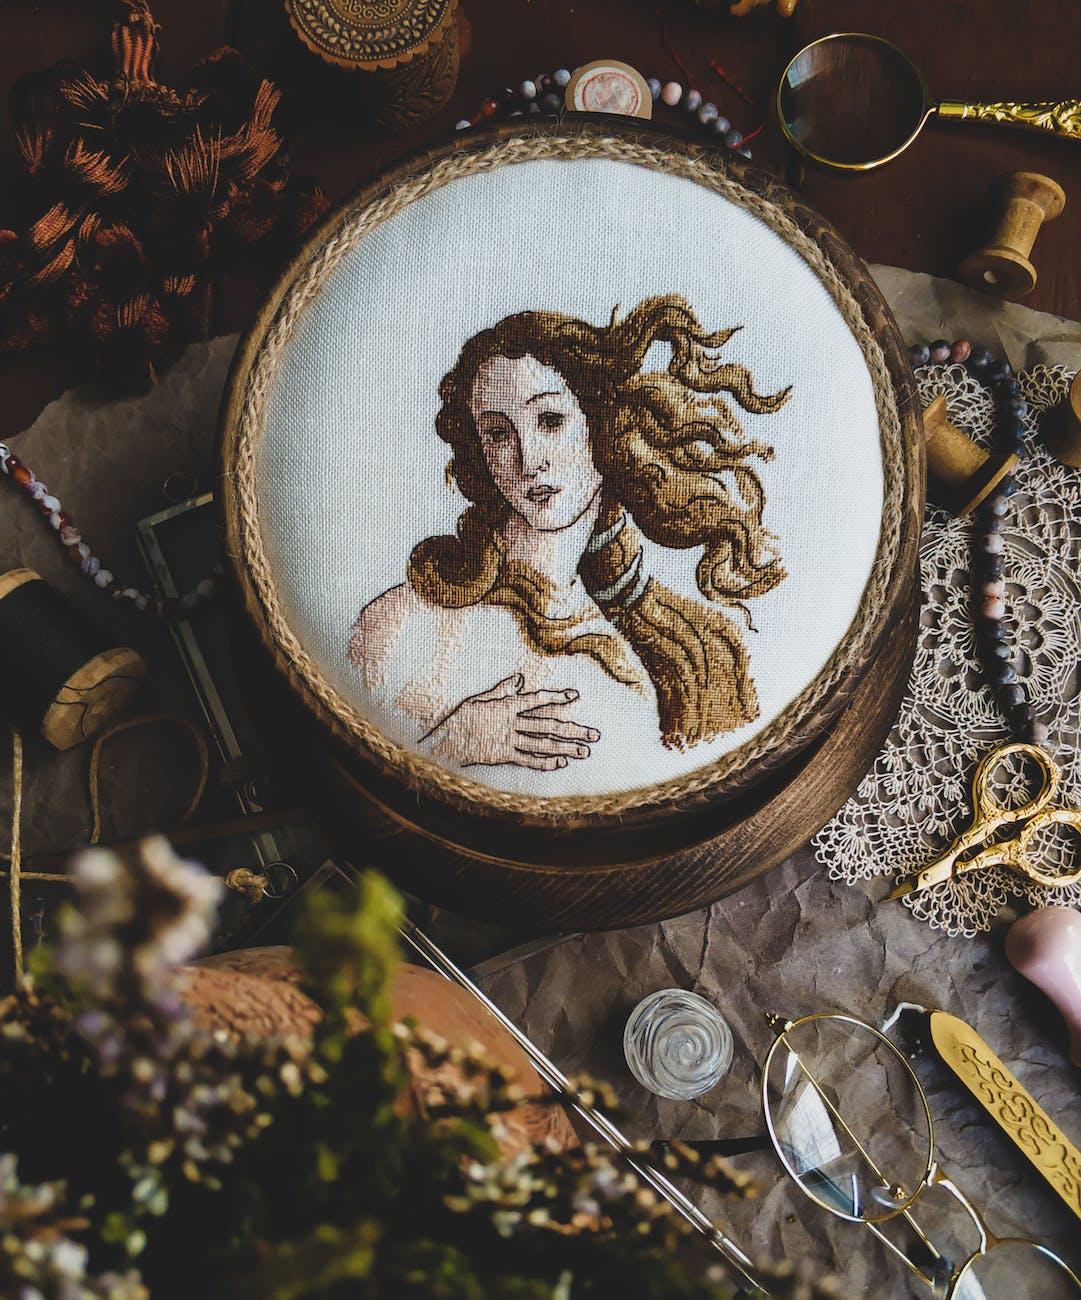 a design of woman on cross stitch project